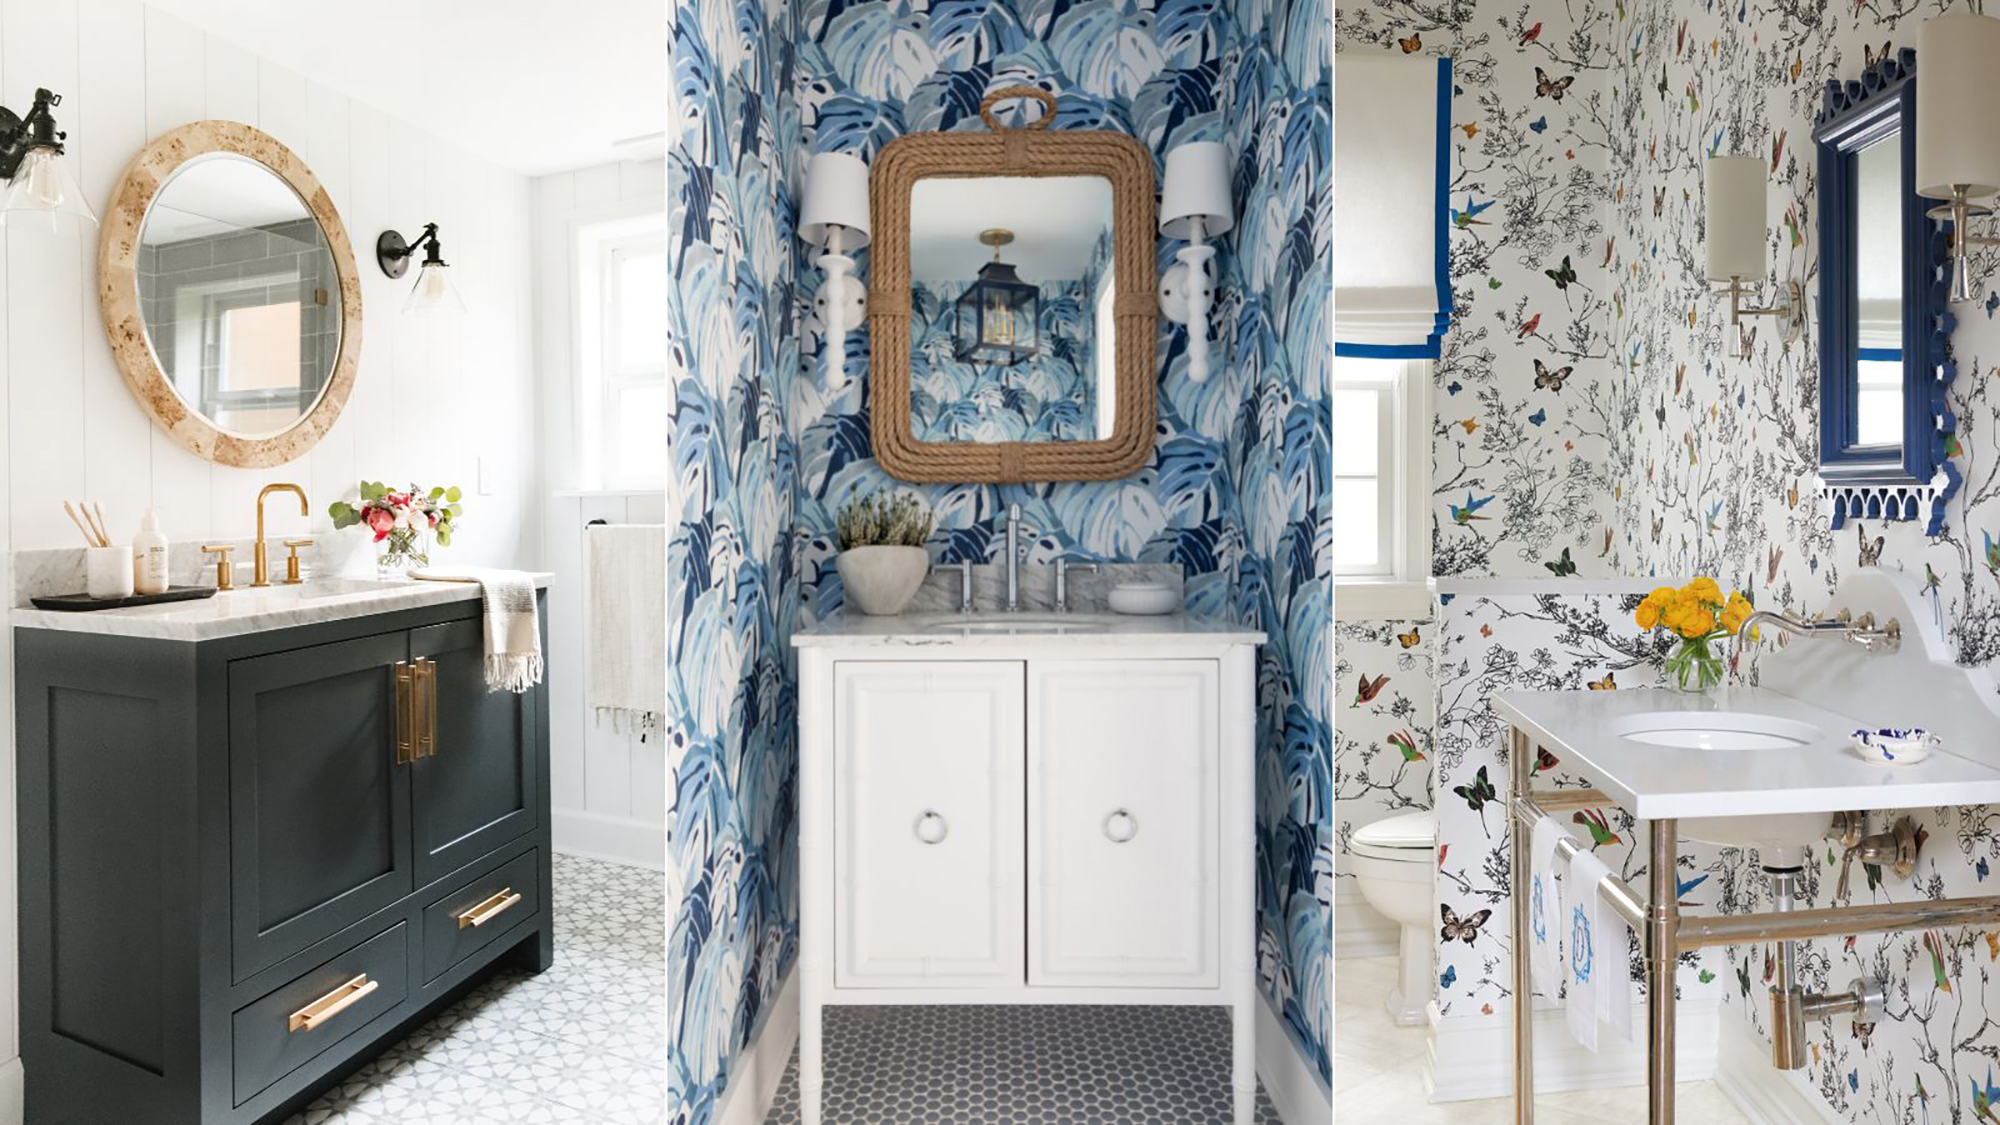 Bathroom vanity ideas: 26 ideas for a stand out vanity area |